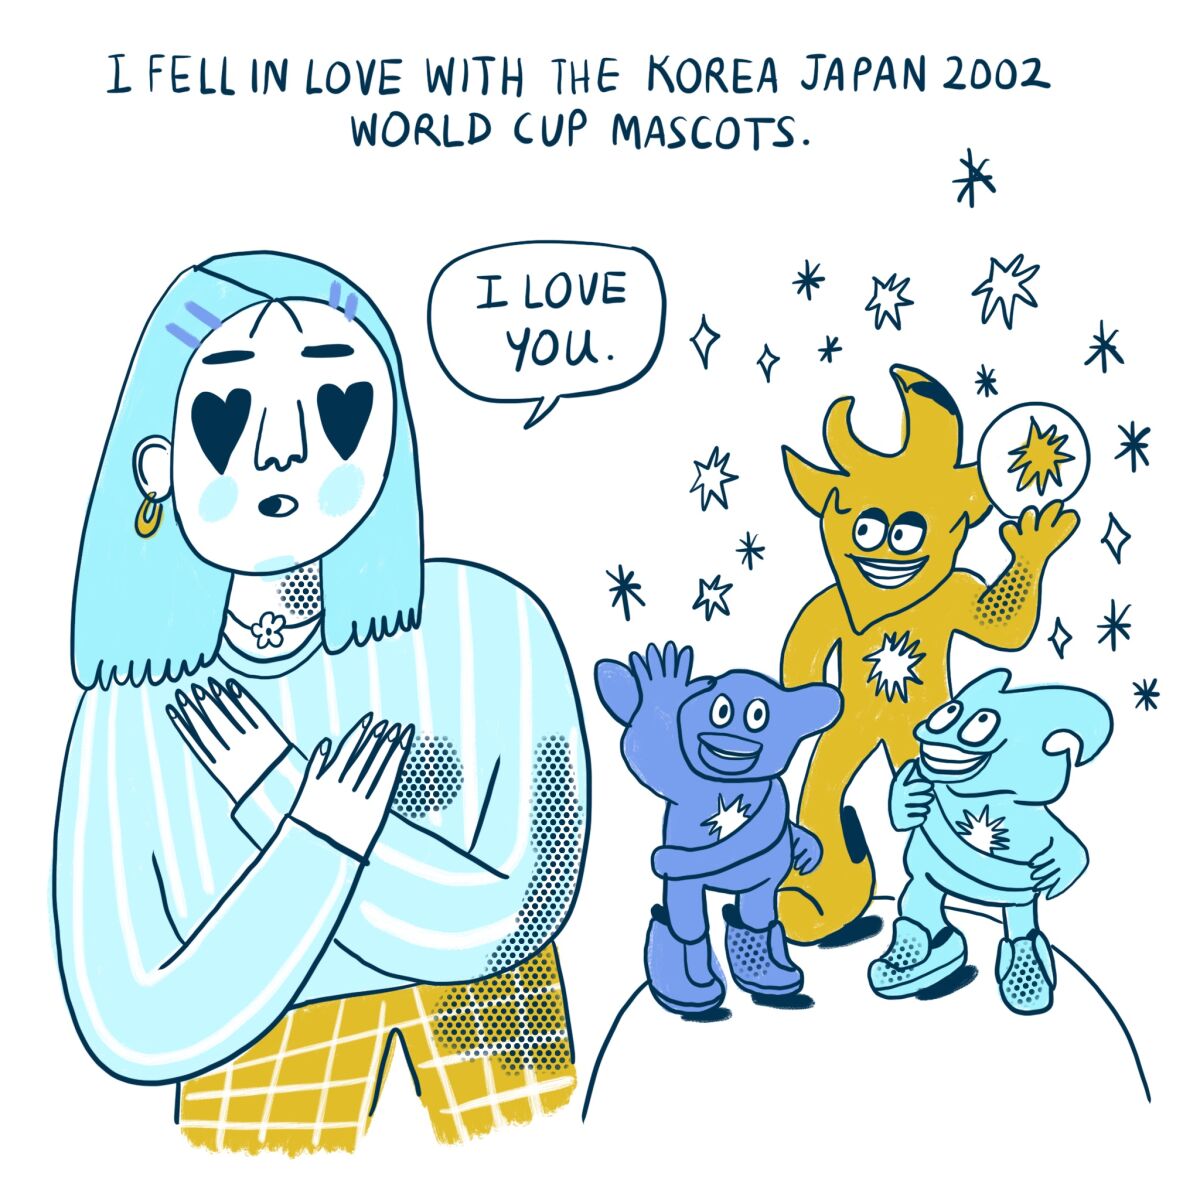 I fell in love with the Korea Japan 2002 world cup mascots 